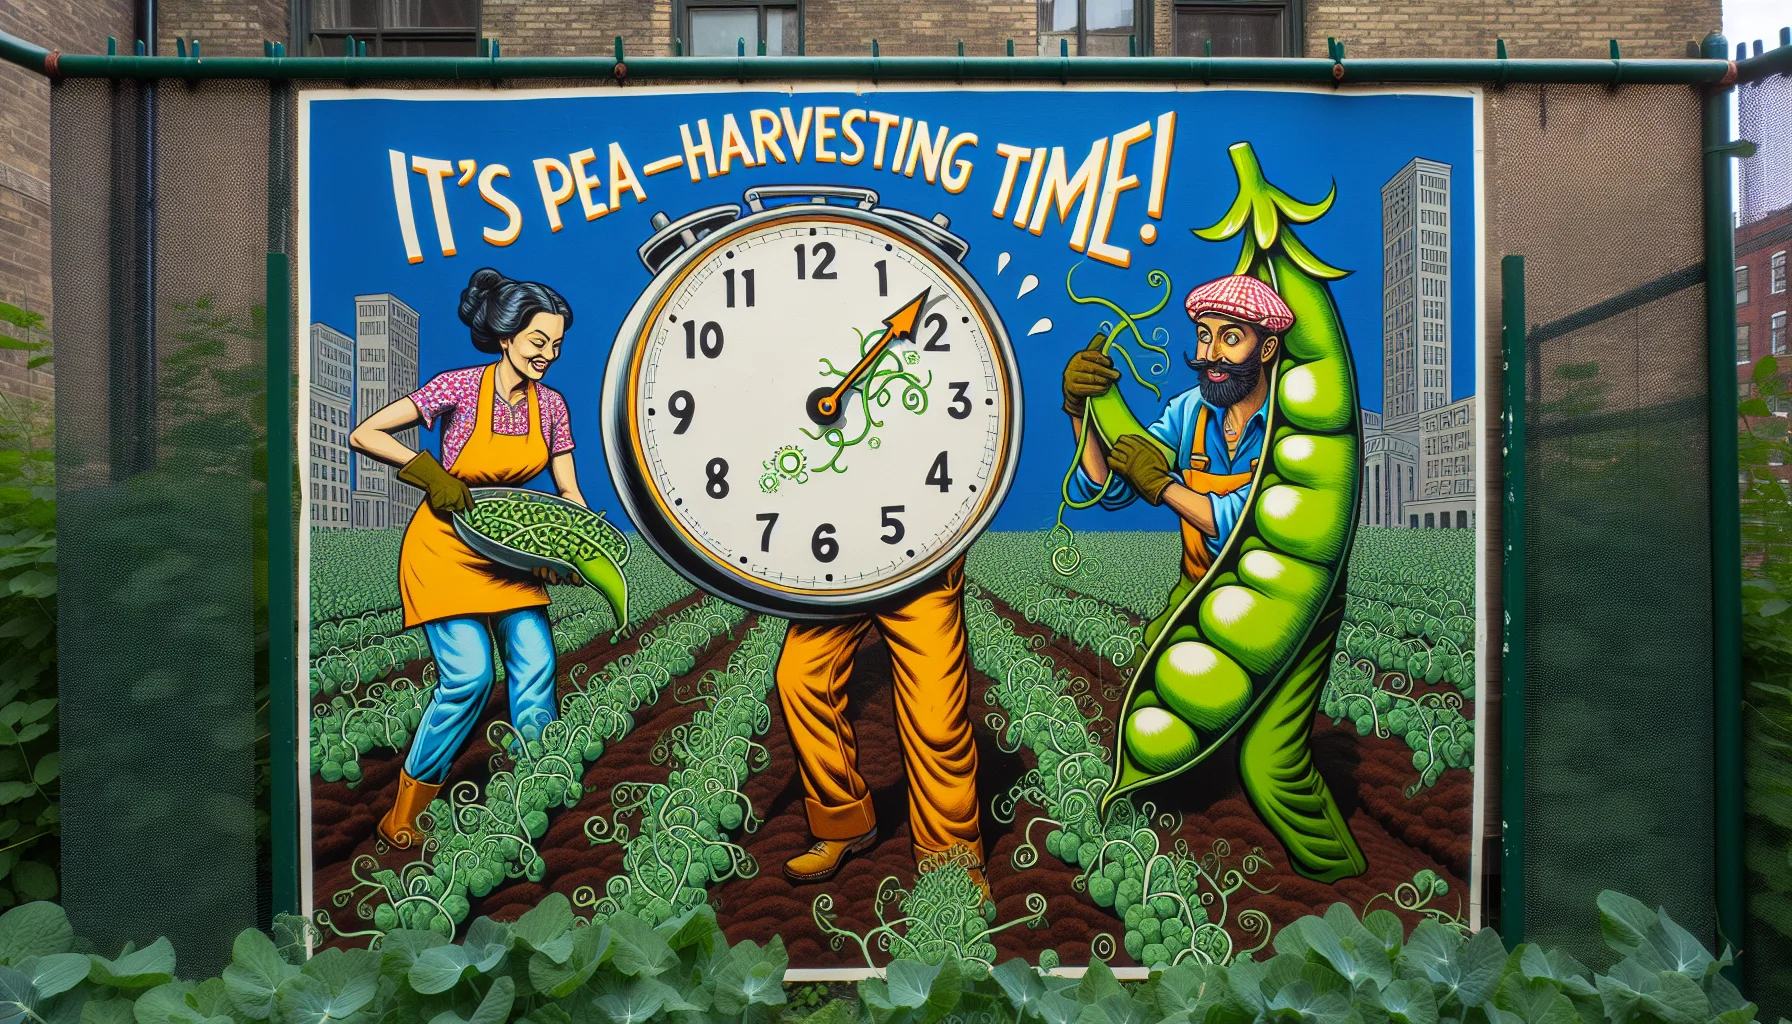 An imaginative and humorous scene set in an urban garden that communicates the optimal time to harvest peas. The scene features a South Asian woman and a Caucasian man, both of whom are clad in bright gardening garb and knee-deep in flourishing pea plants. The woman is holding up a pea pod as large as a loaf of bread, and the man wear a watch with a clock face replaced by a ripe pea pod. Spiraling text above them reads, 'It's pea-harvesting time!' The art should inspire people to partake in the joy of gardening.